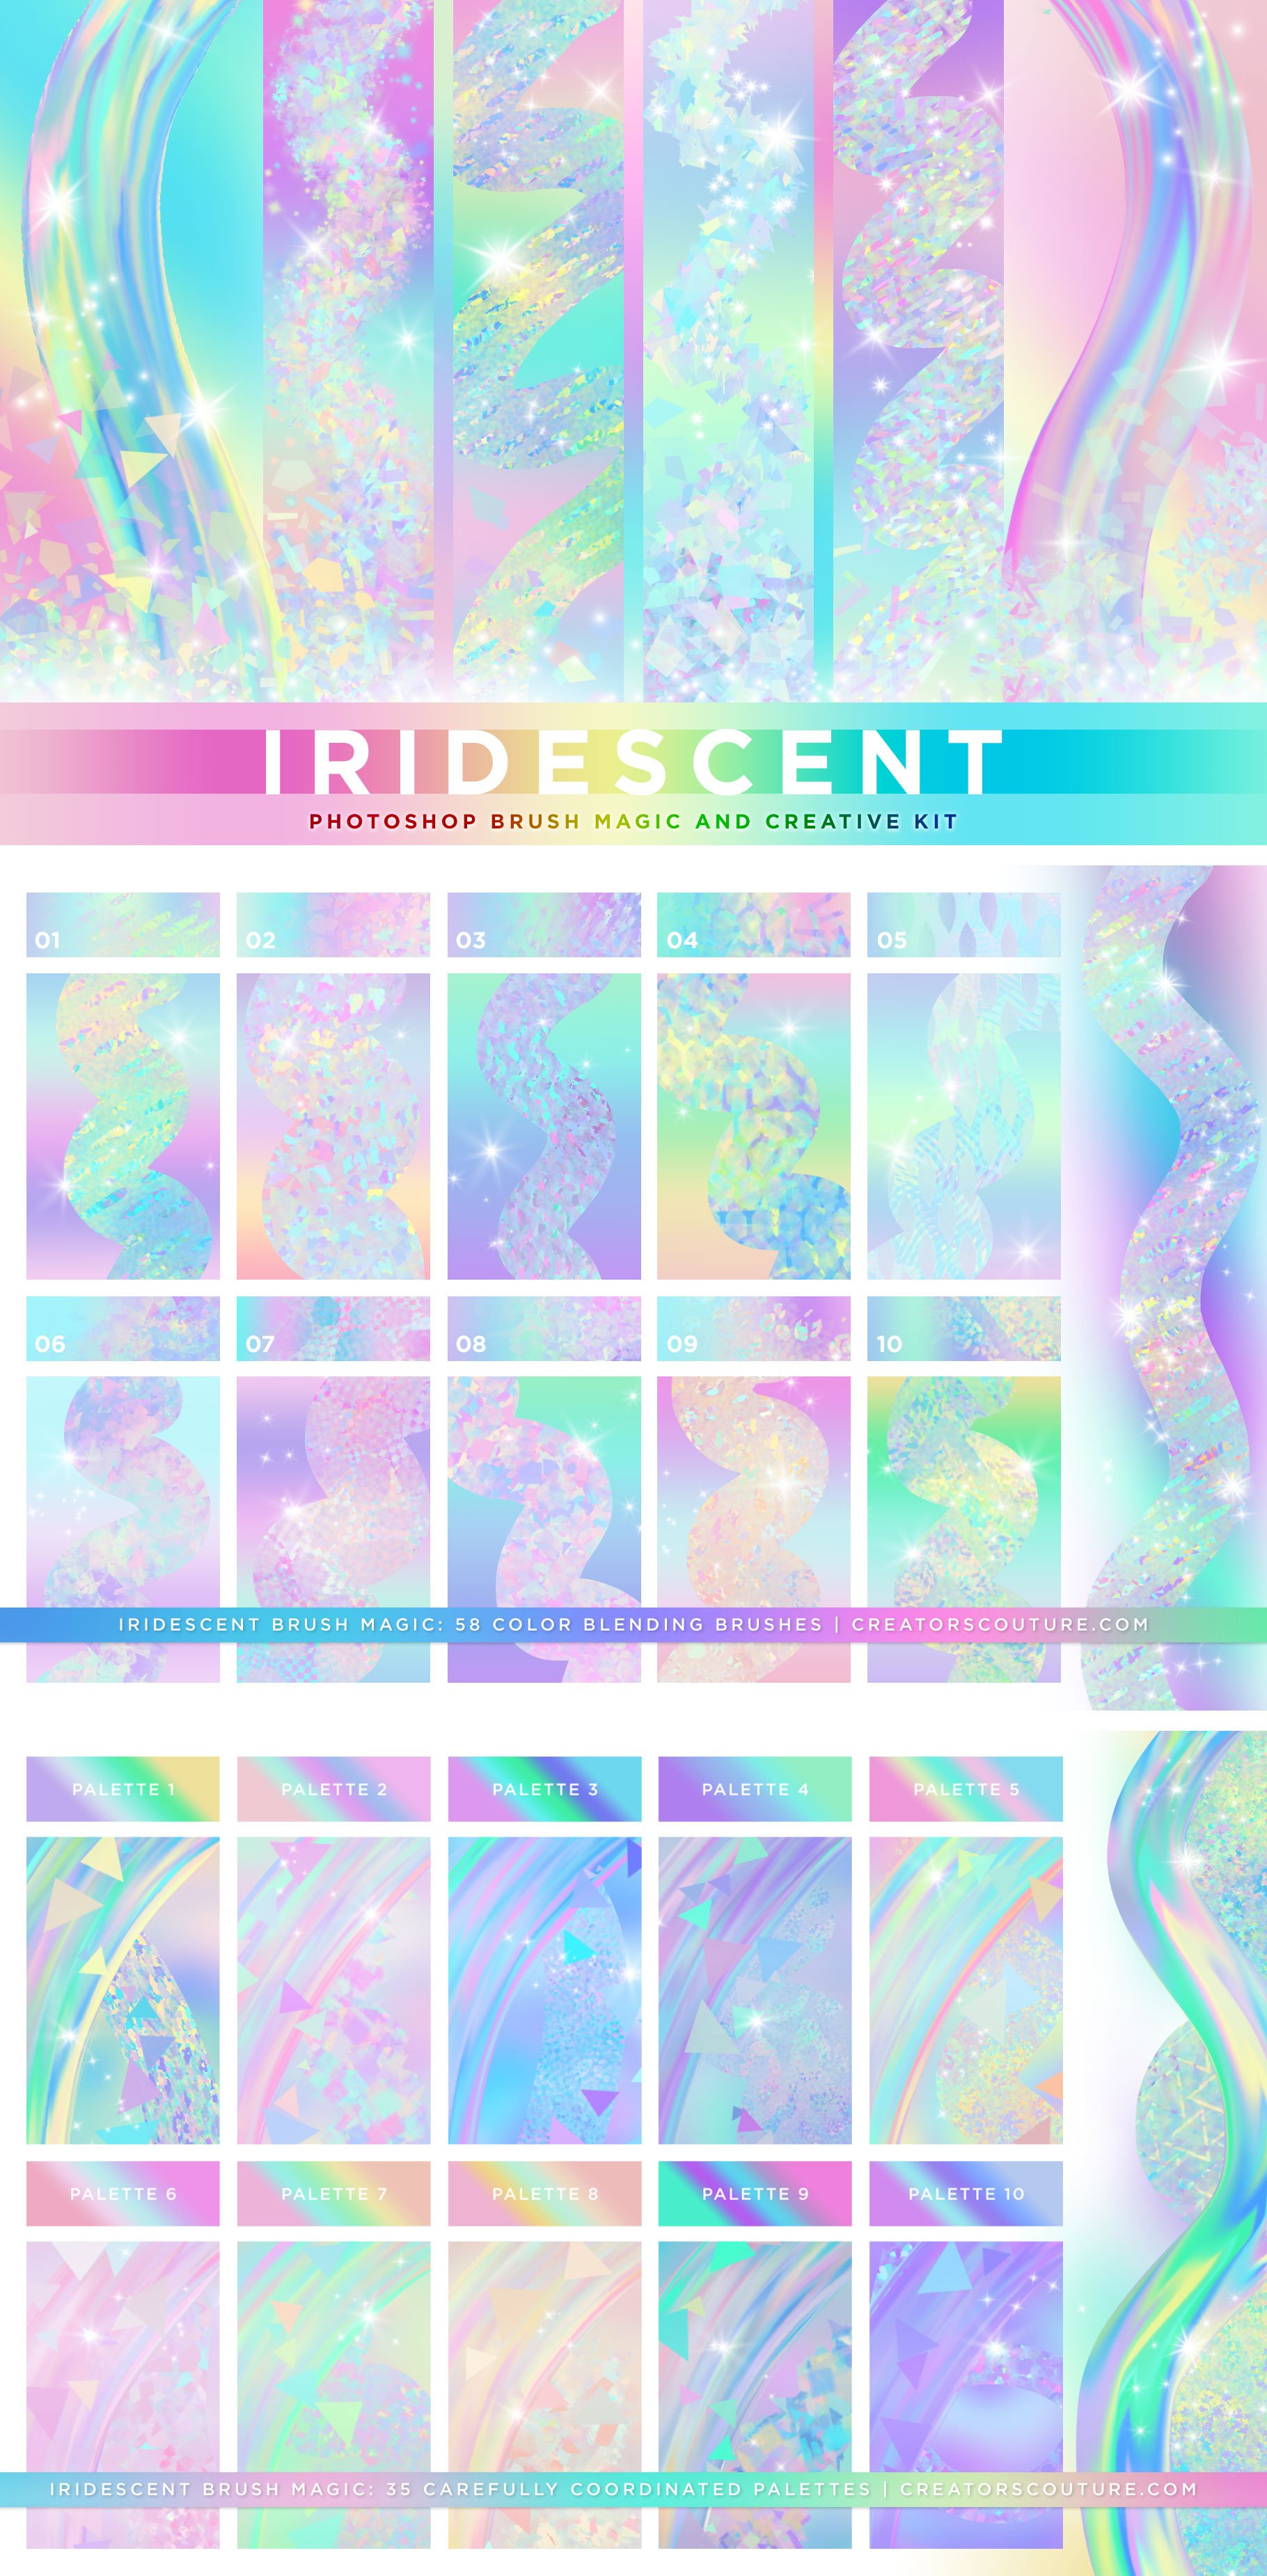 Iridescent & Holographic Brush Magiccover image.